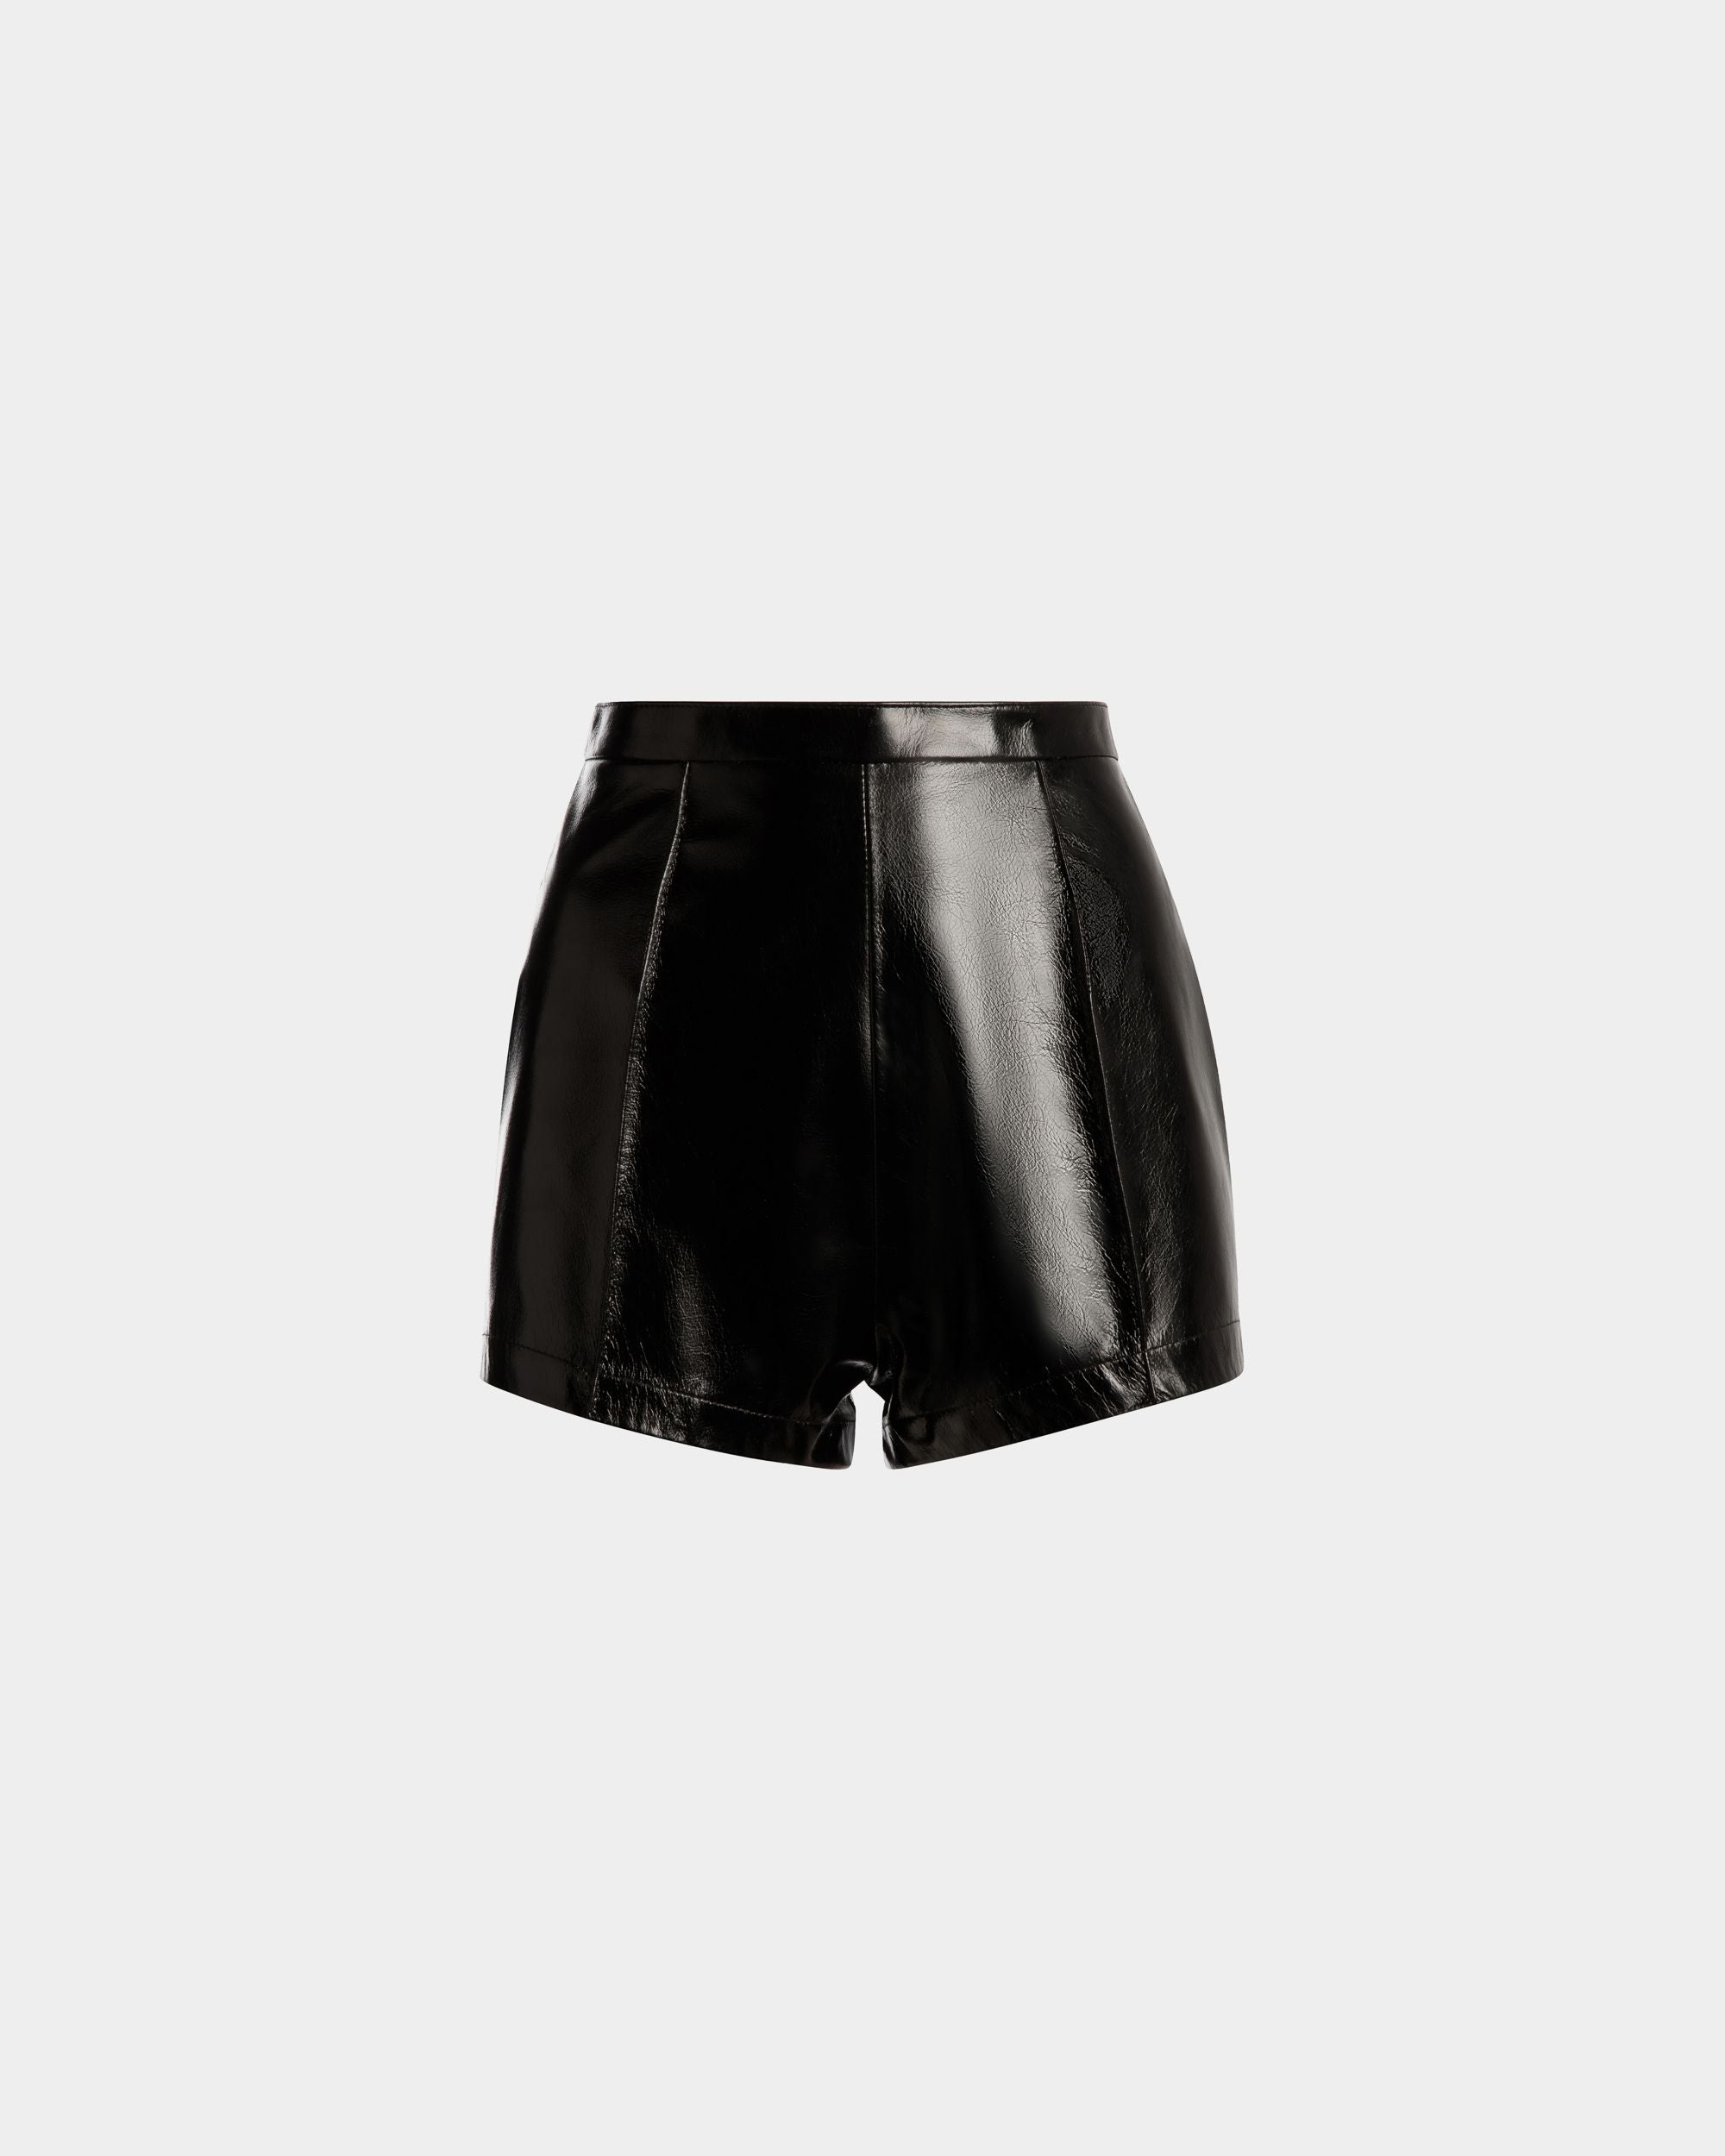 Women's Shorts in Black Leather | Bally | Still Life Front